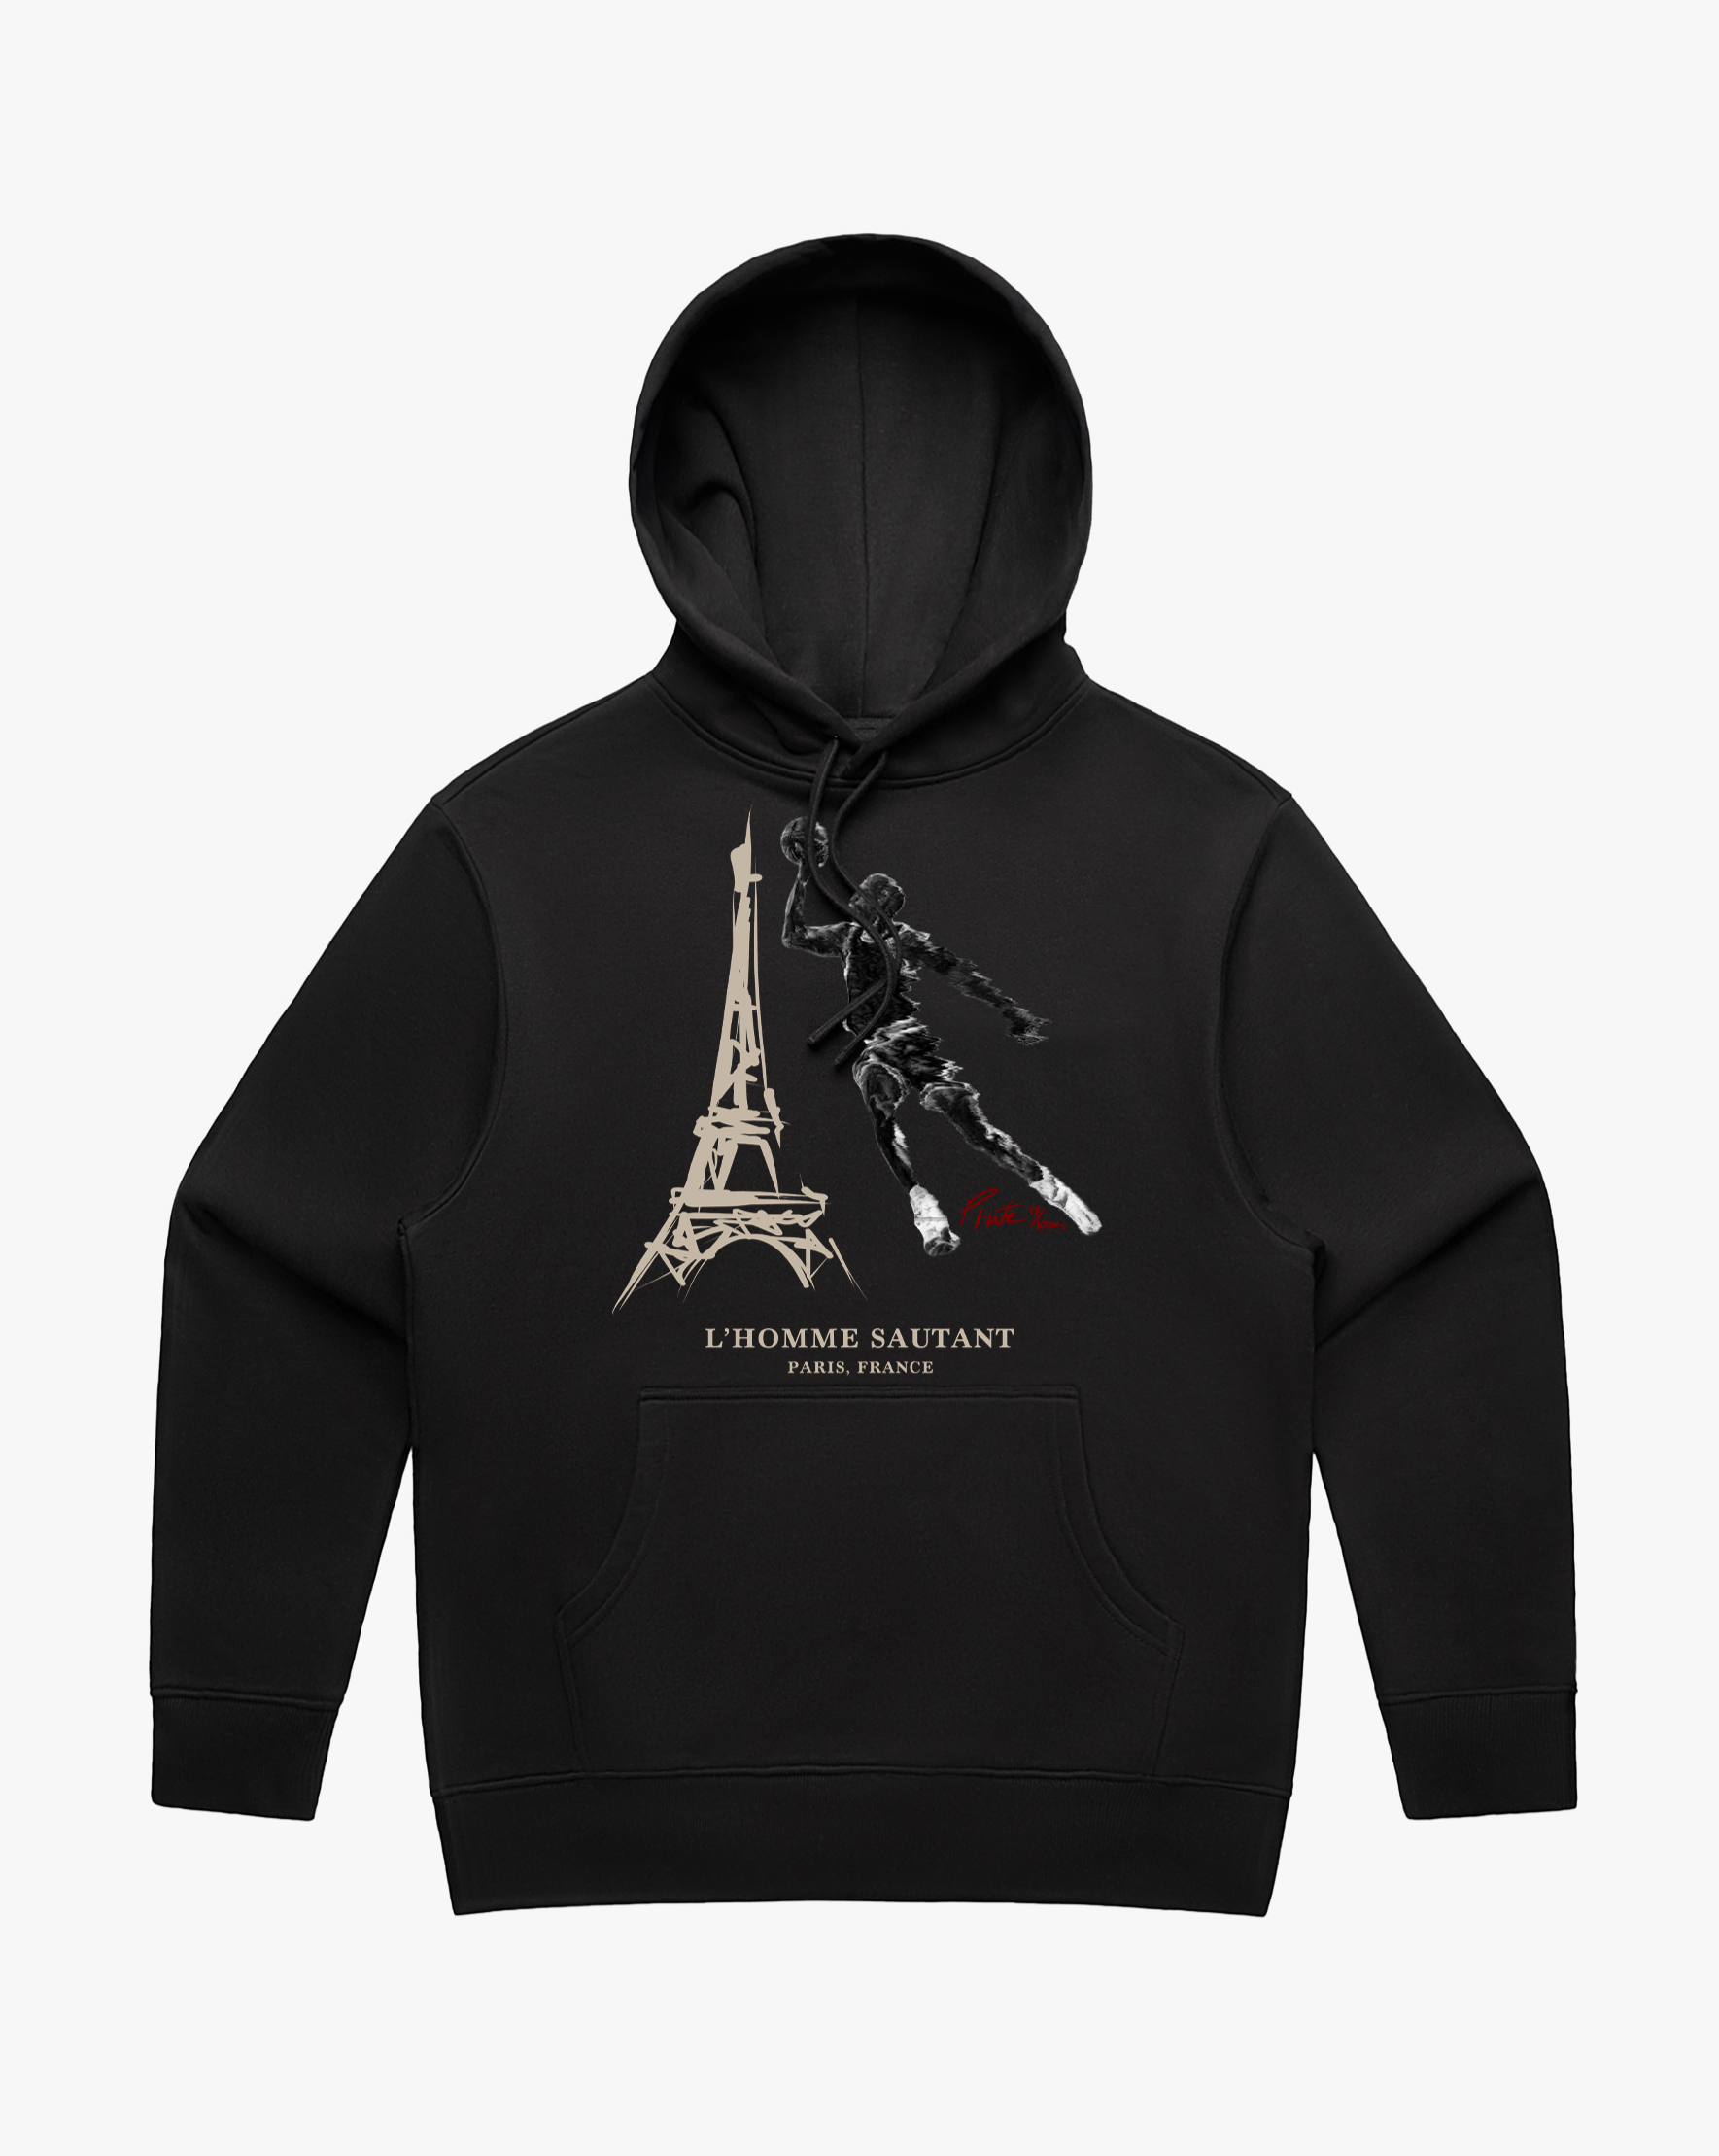 Pirate L'Homme Sautant Heavyweight Hoodie (72 Wins Edition)